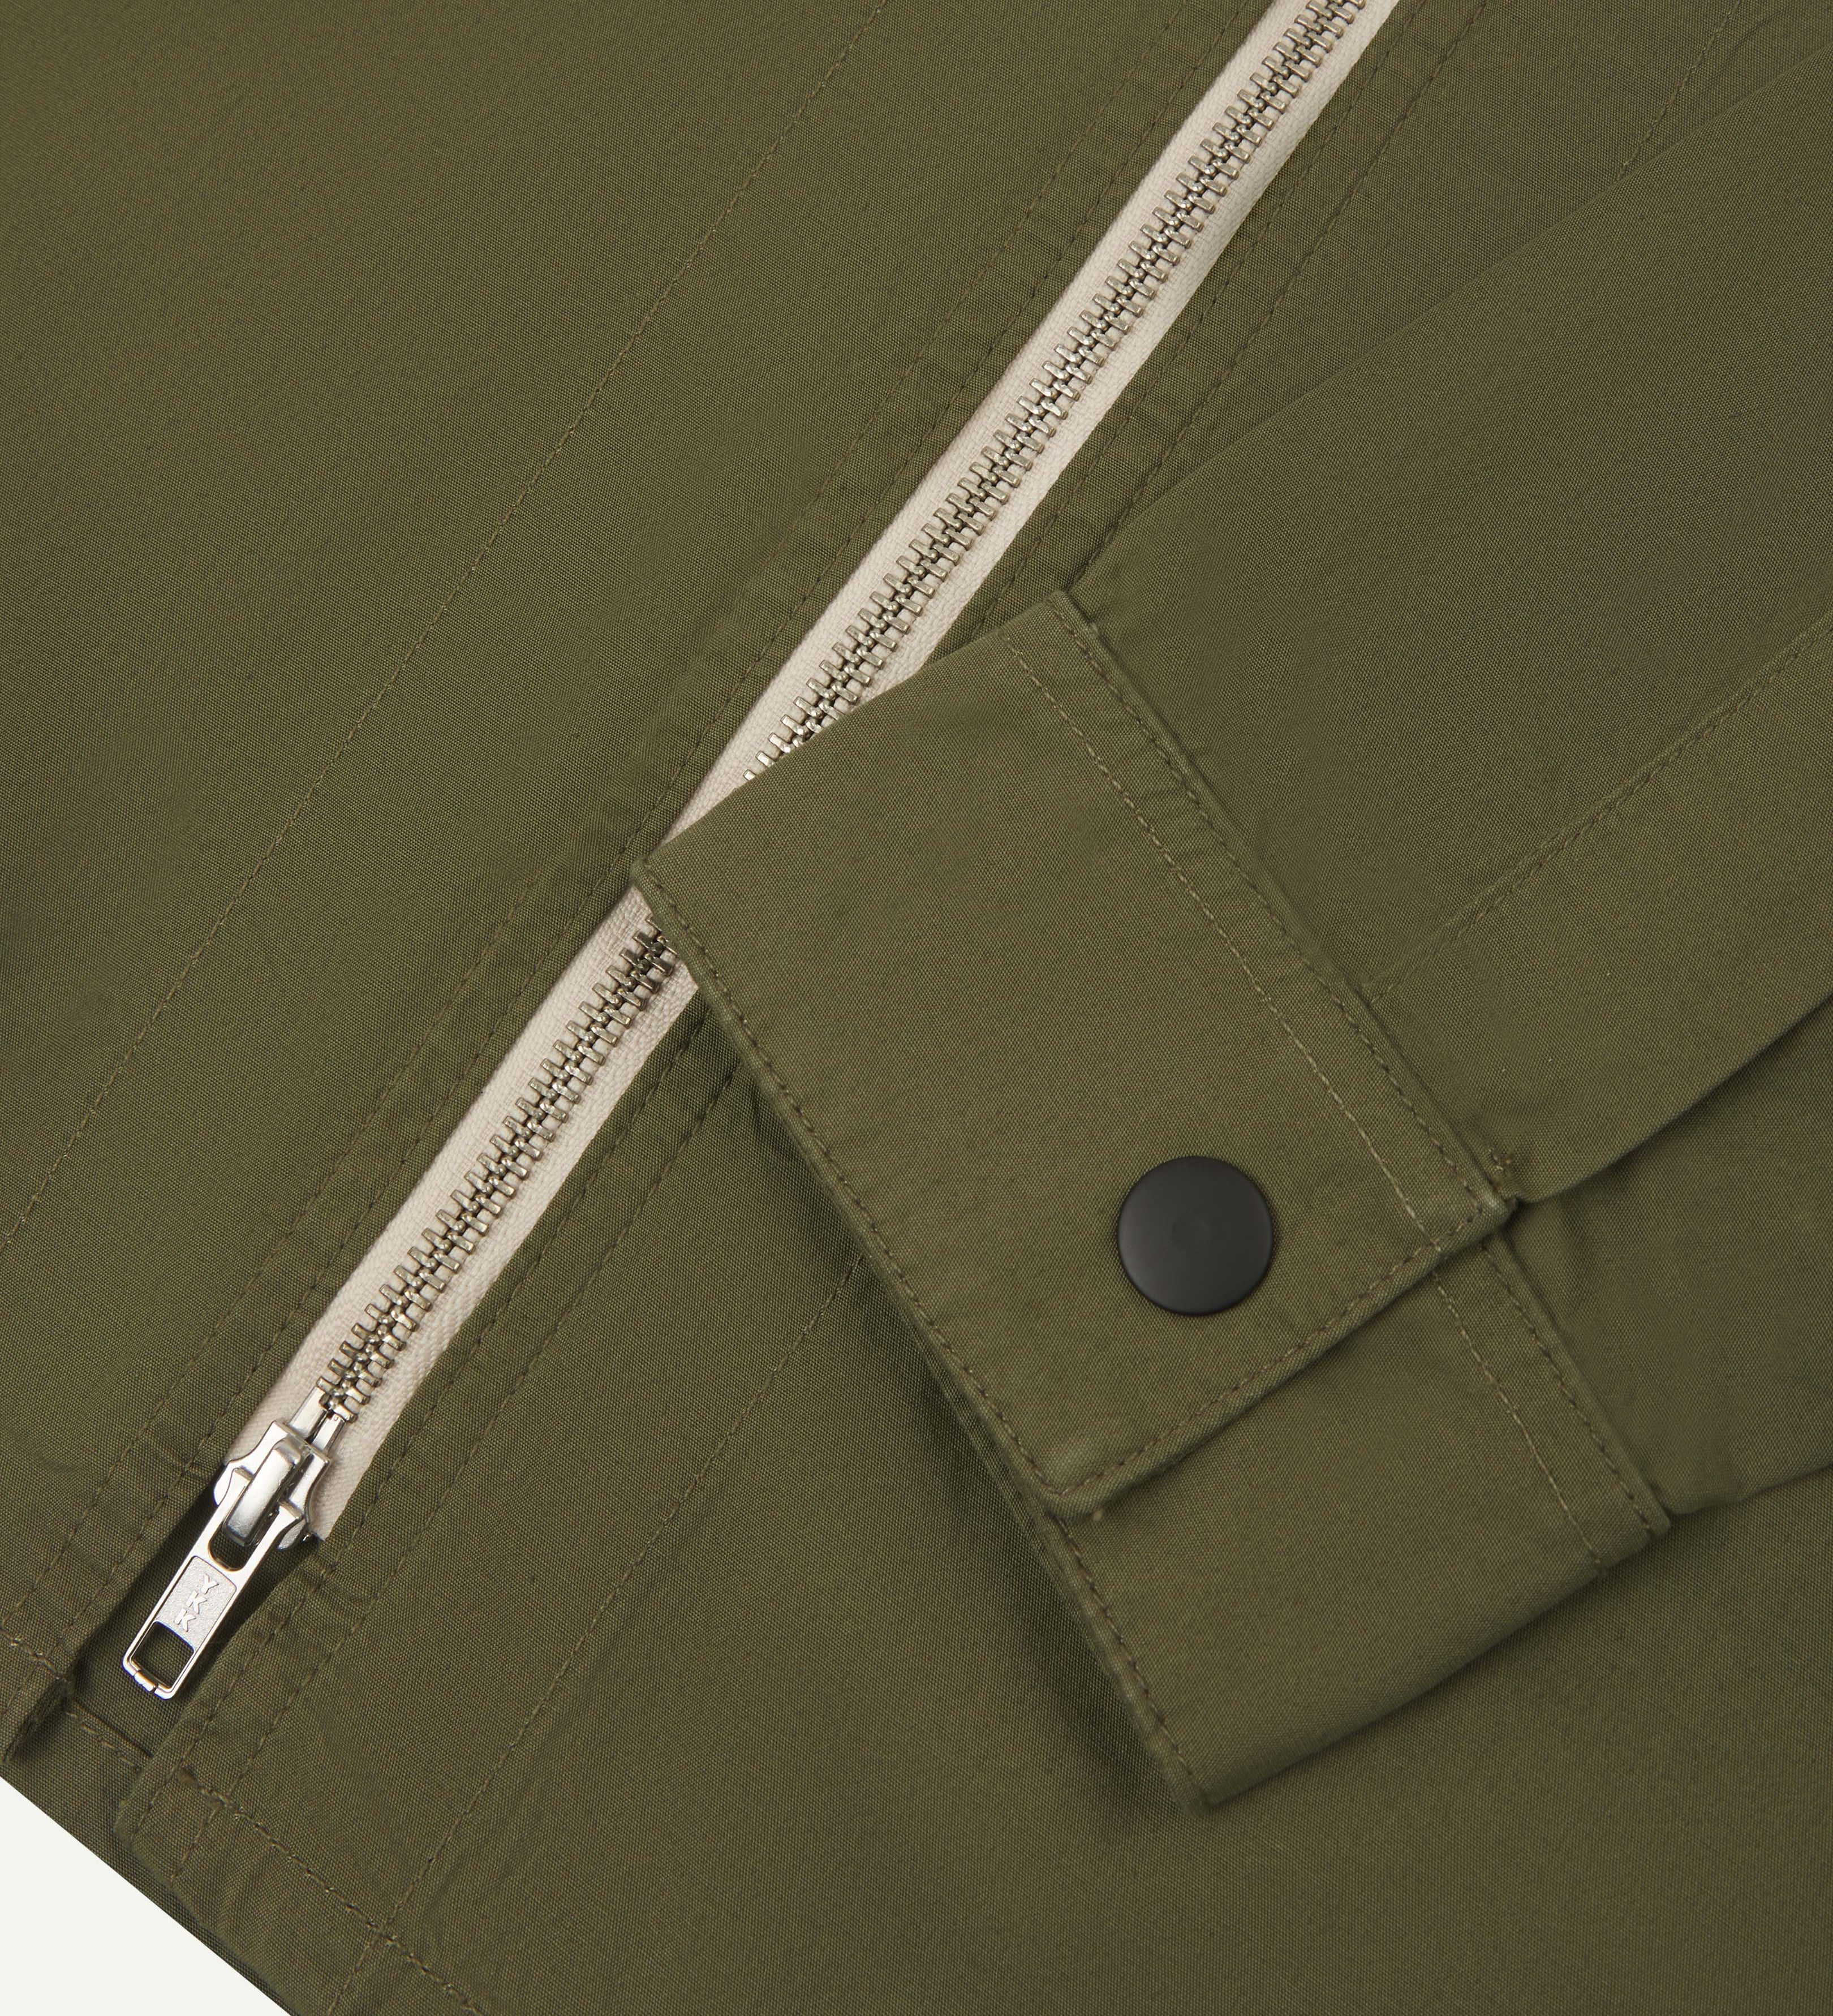 Close-up view of uskees zip front lightweight men's jacket in olive green showing the contrast zip and black popper fastening on cuff.